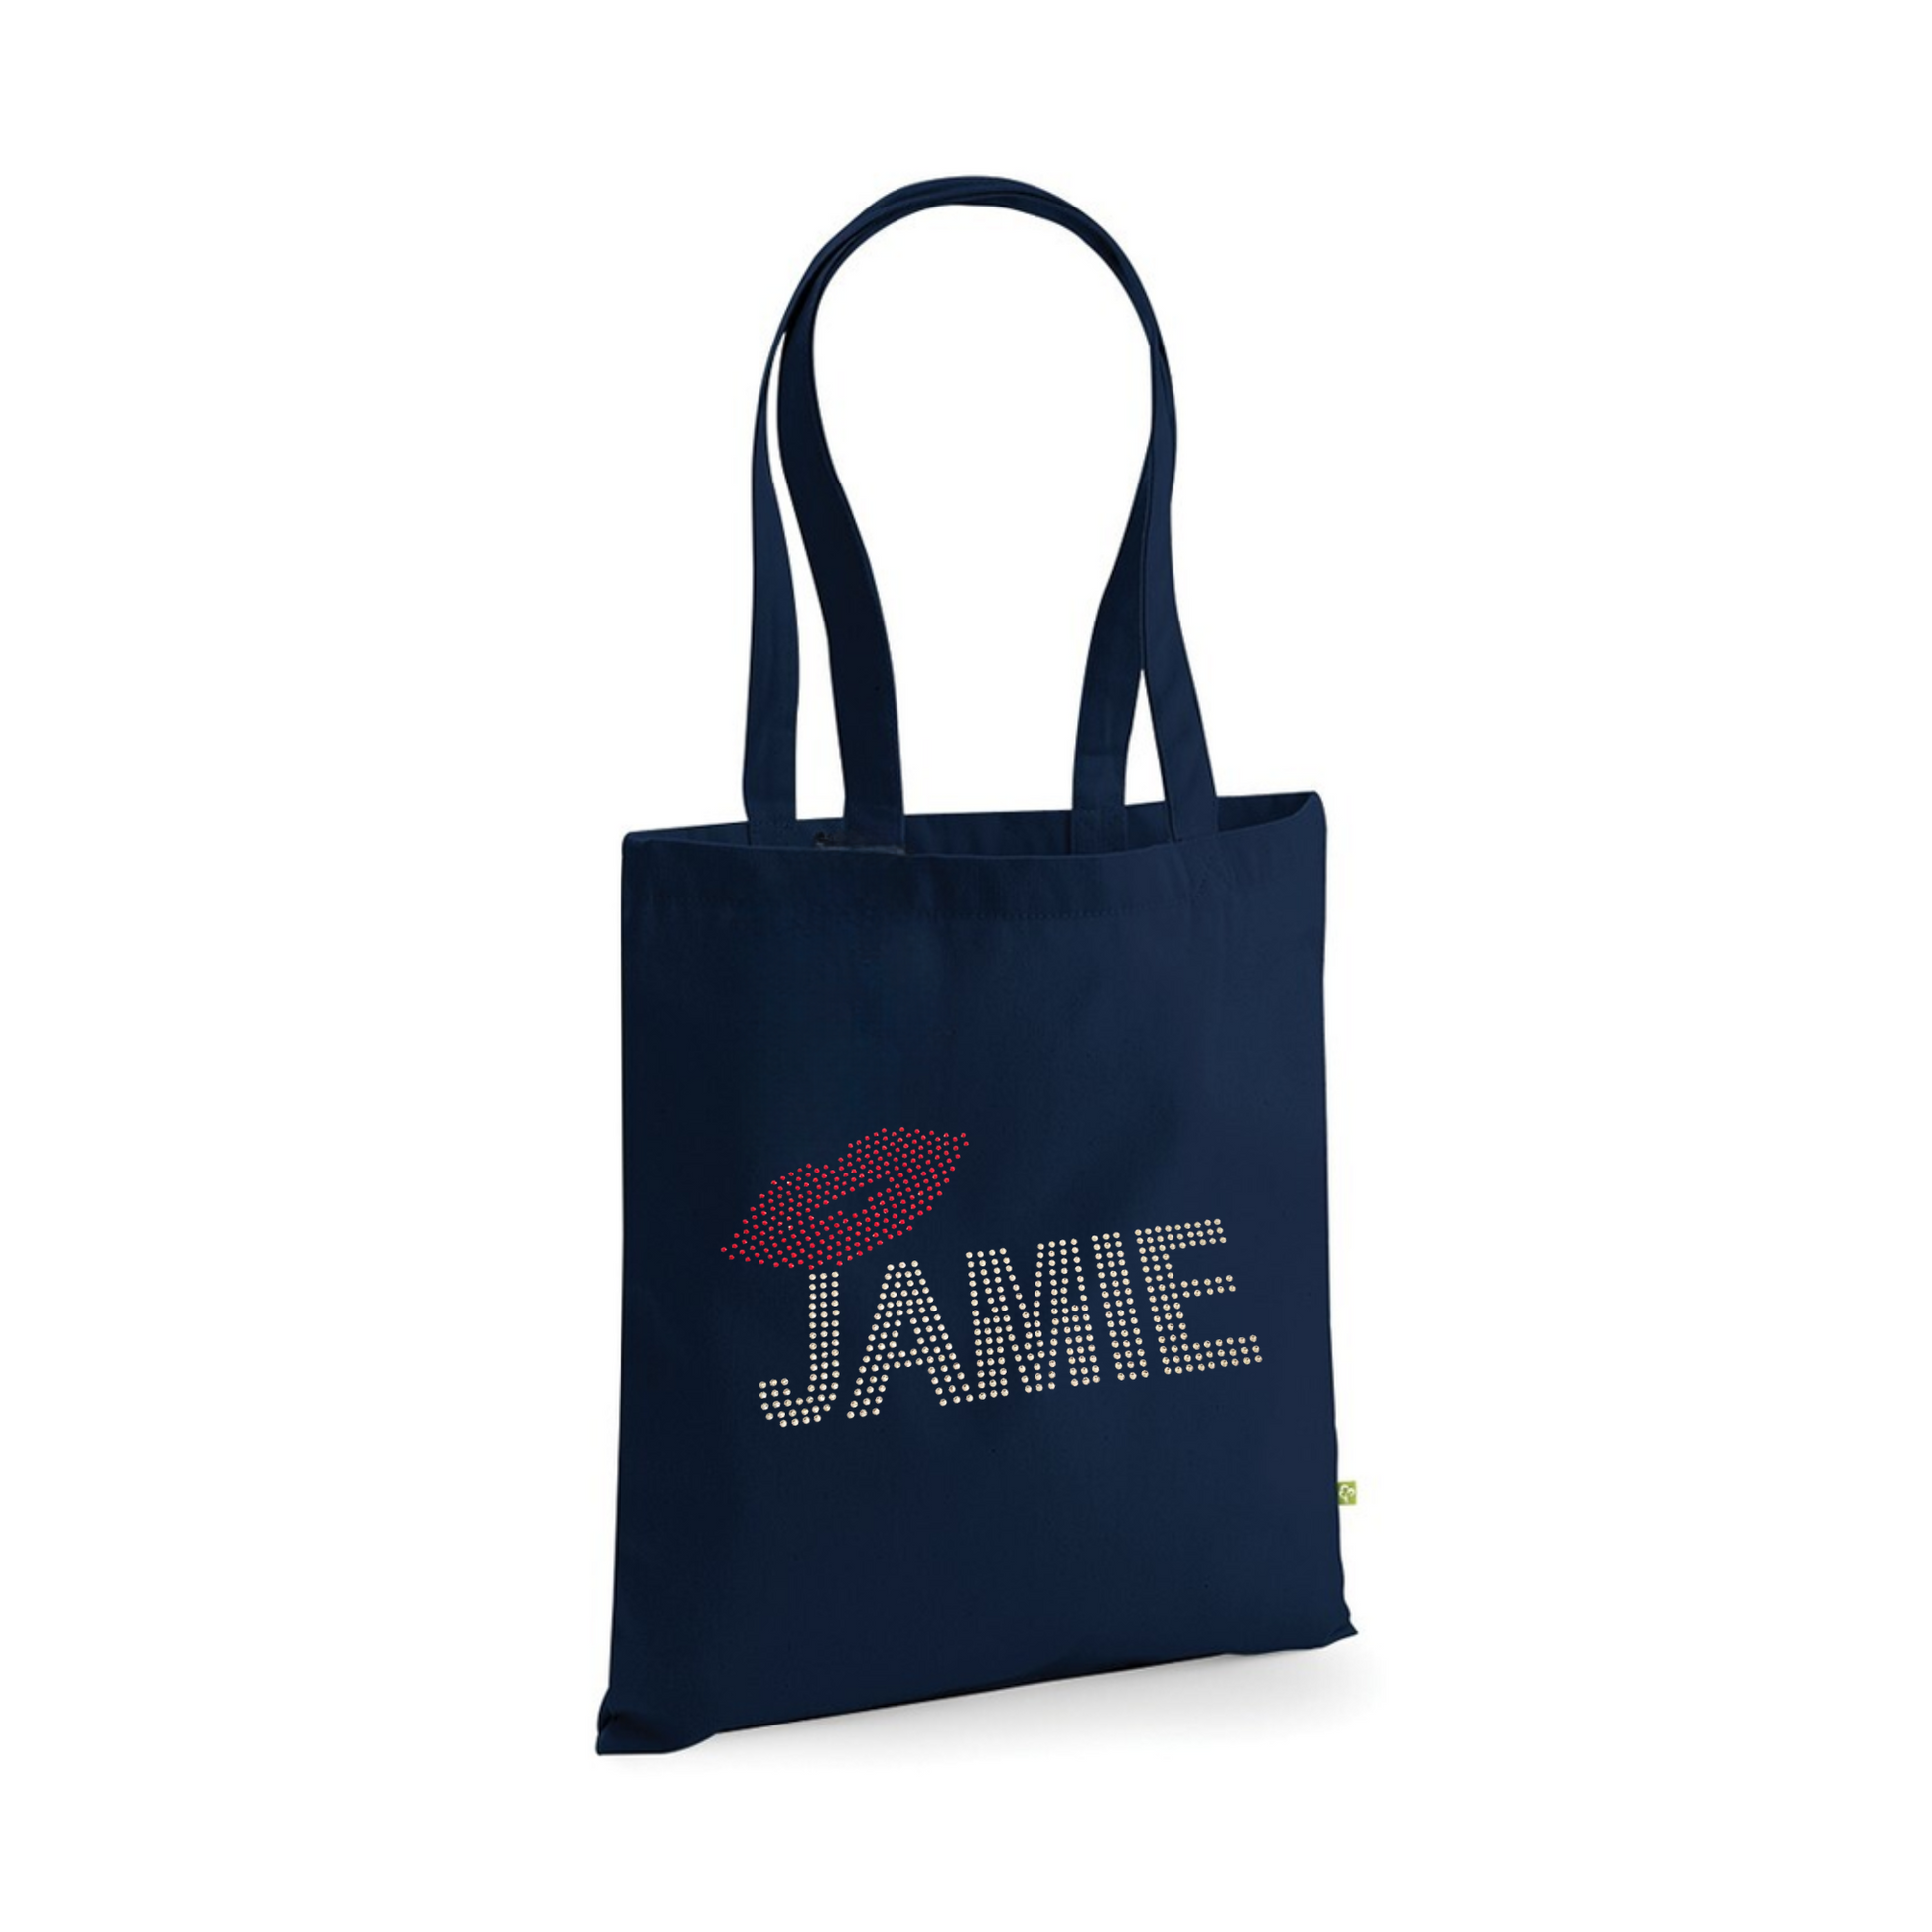 Strong navy rectangular tote bag with silver rhinestones detailing Jamie and red rhinestones lips, very sparkly